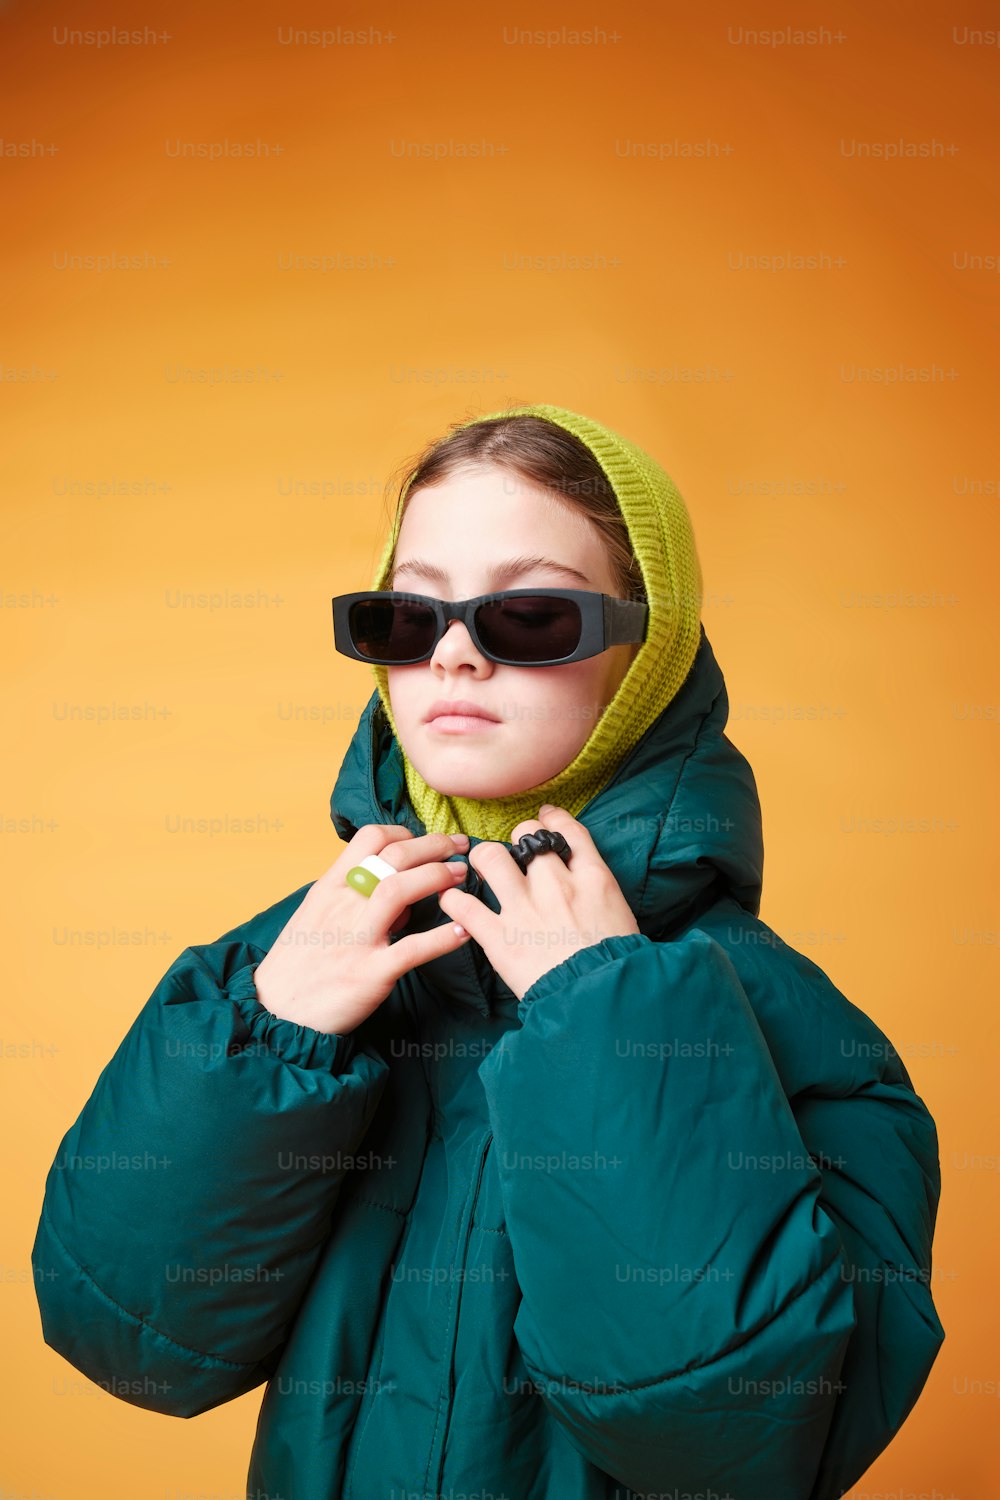 a woman wearing sunglasses and a green jacket